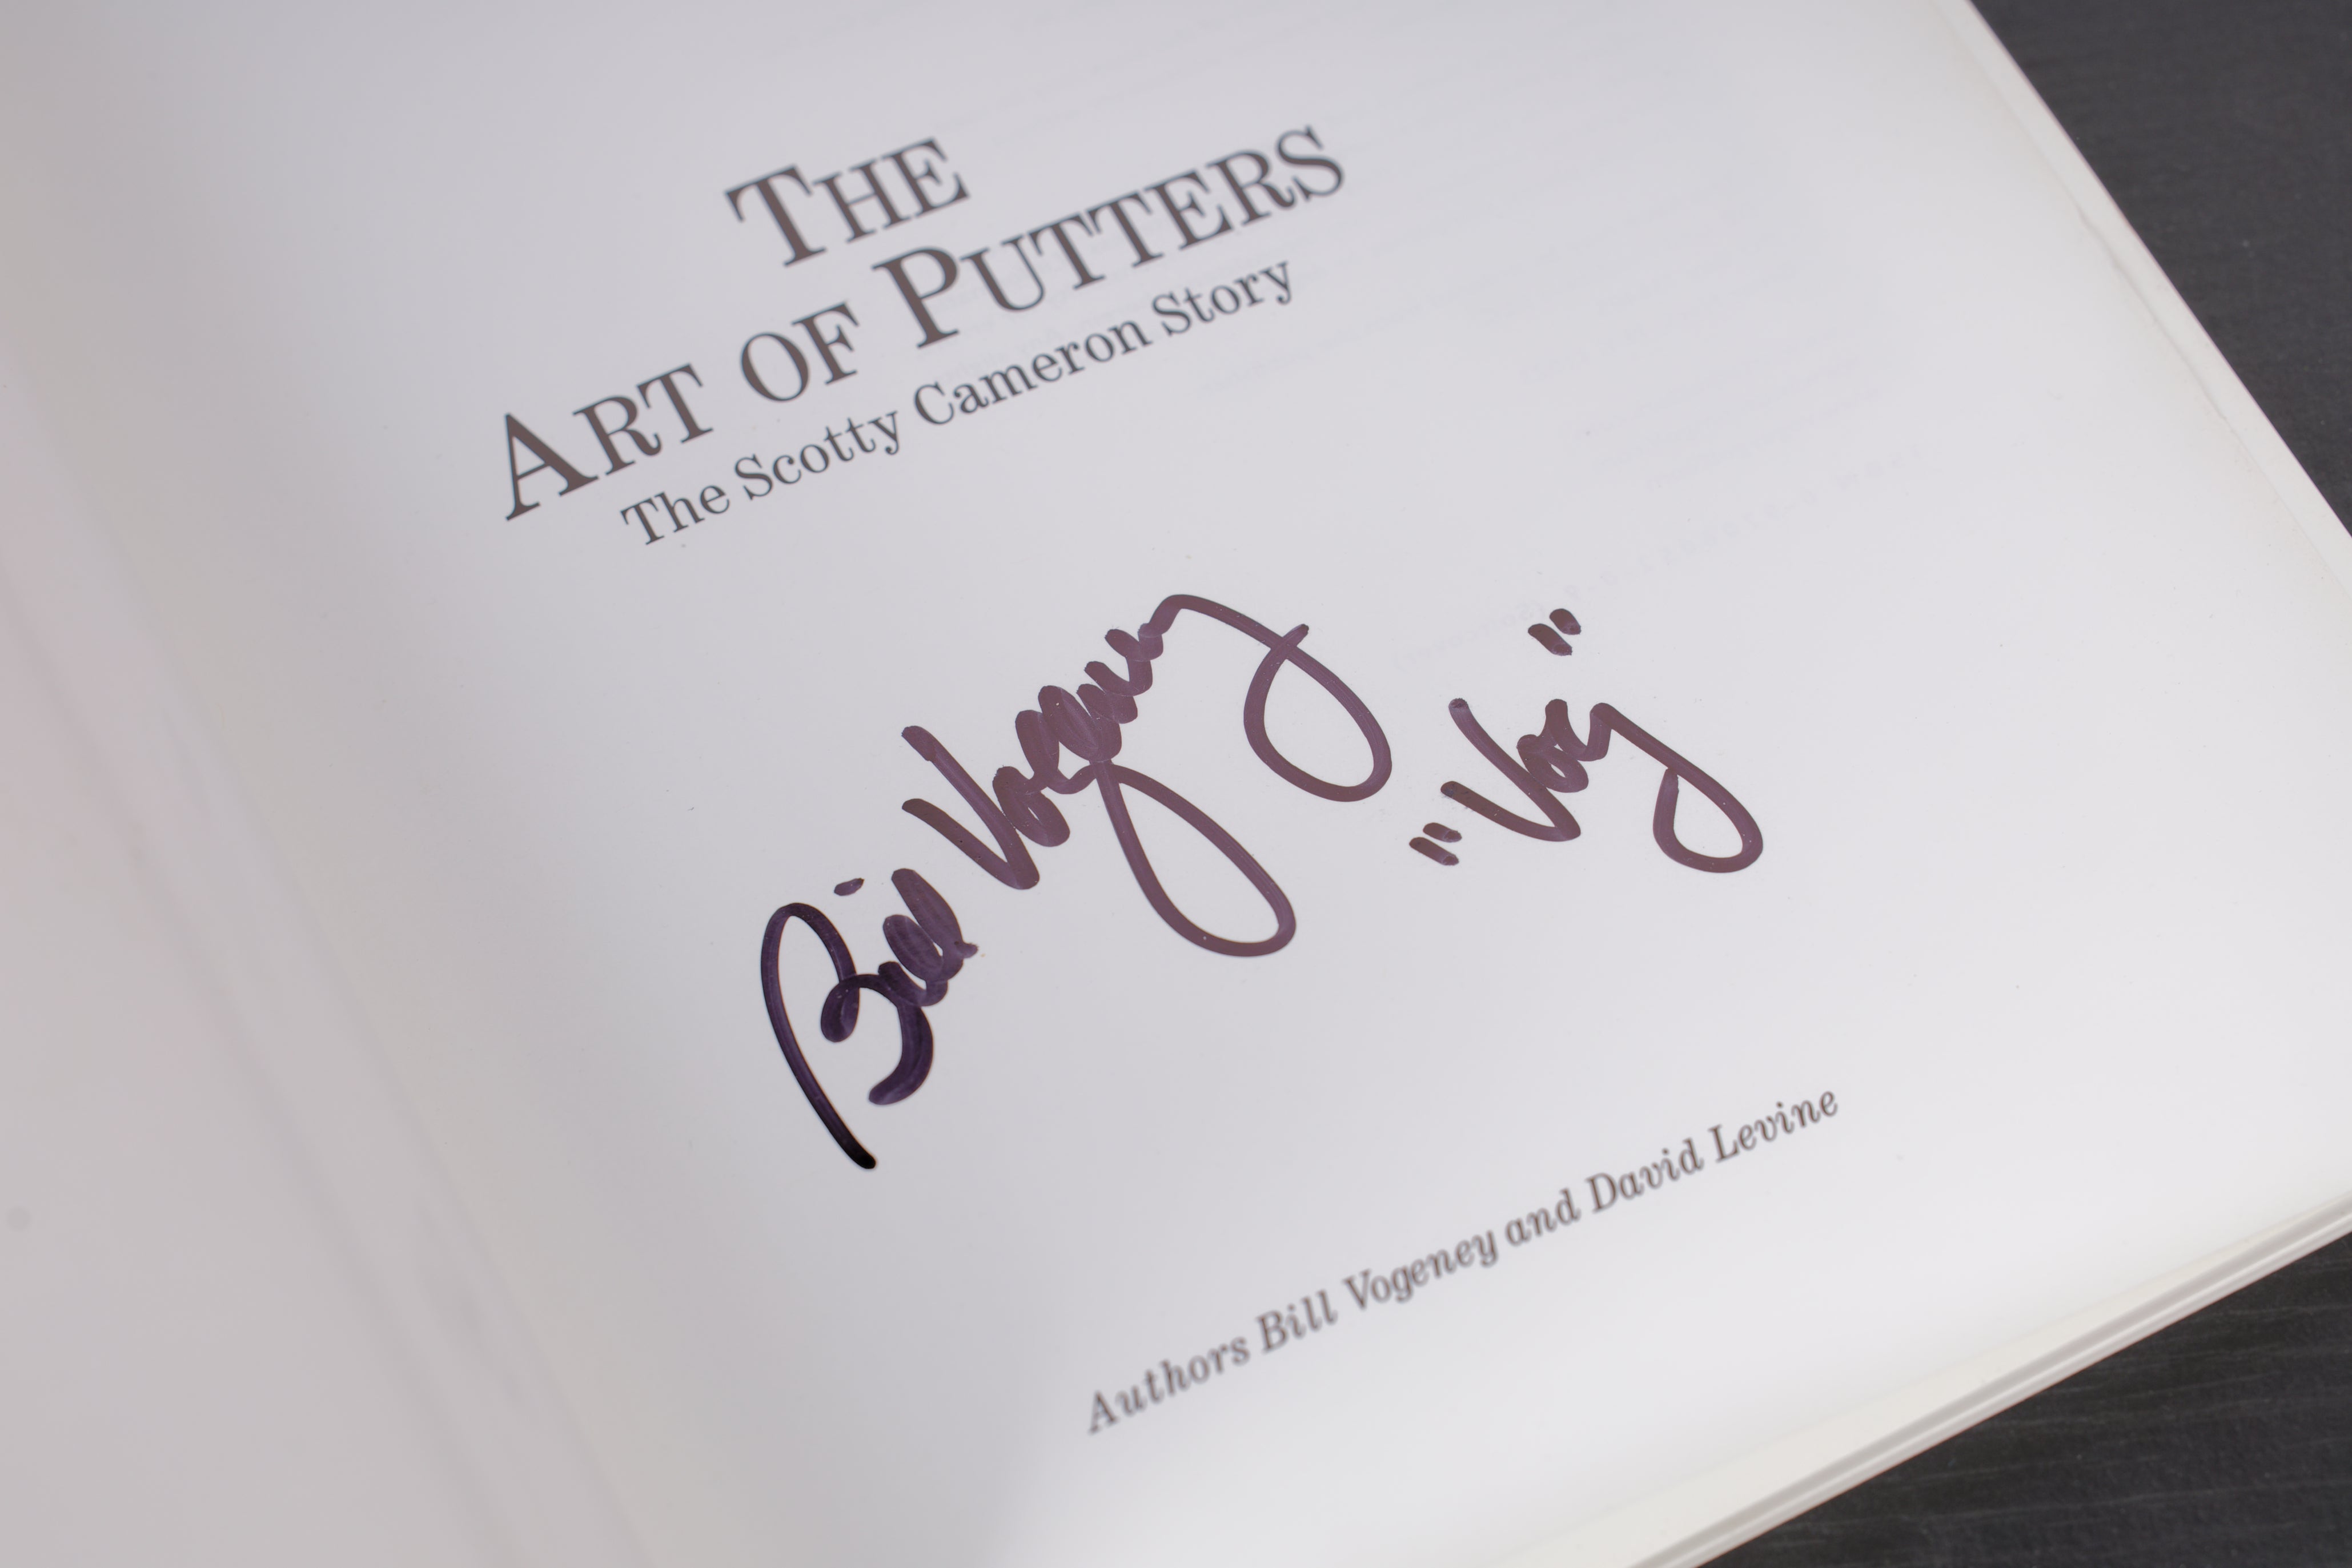 2001 The Art of Putters Book